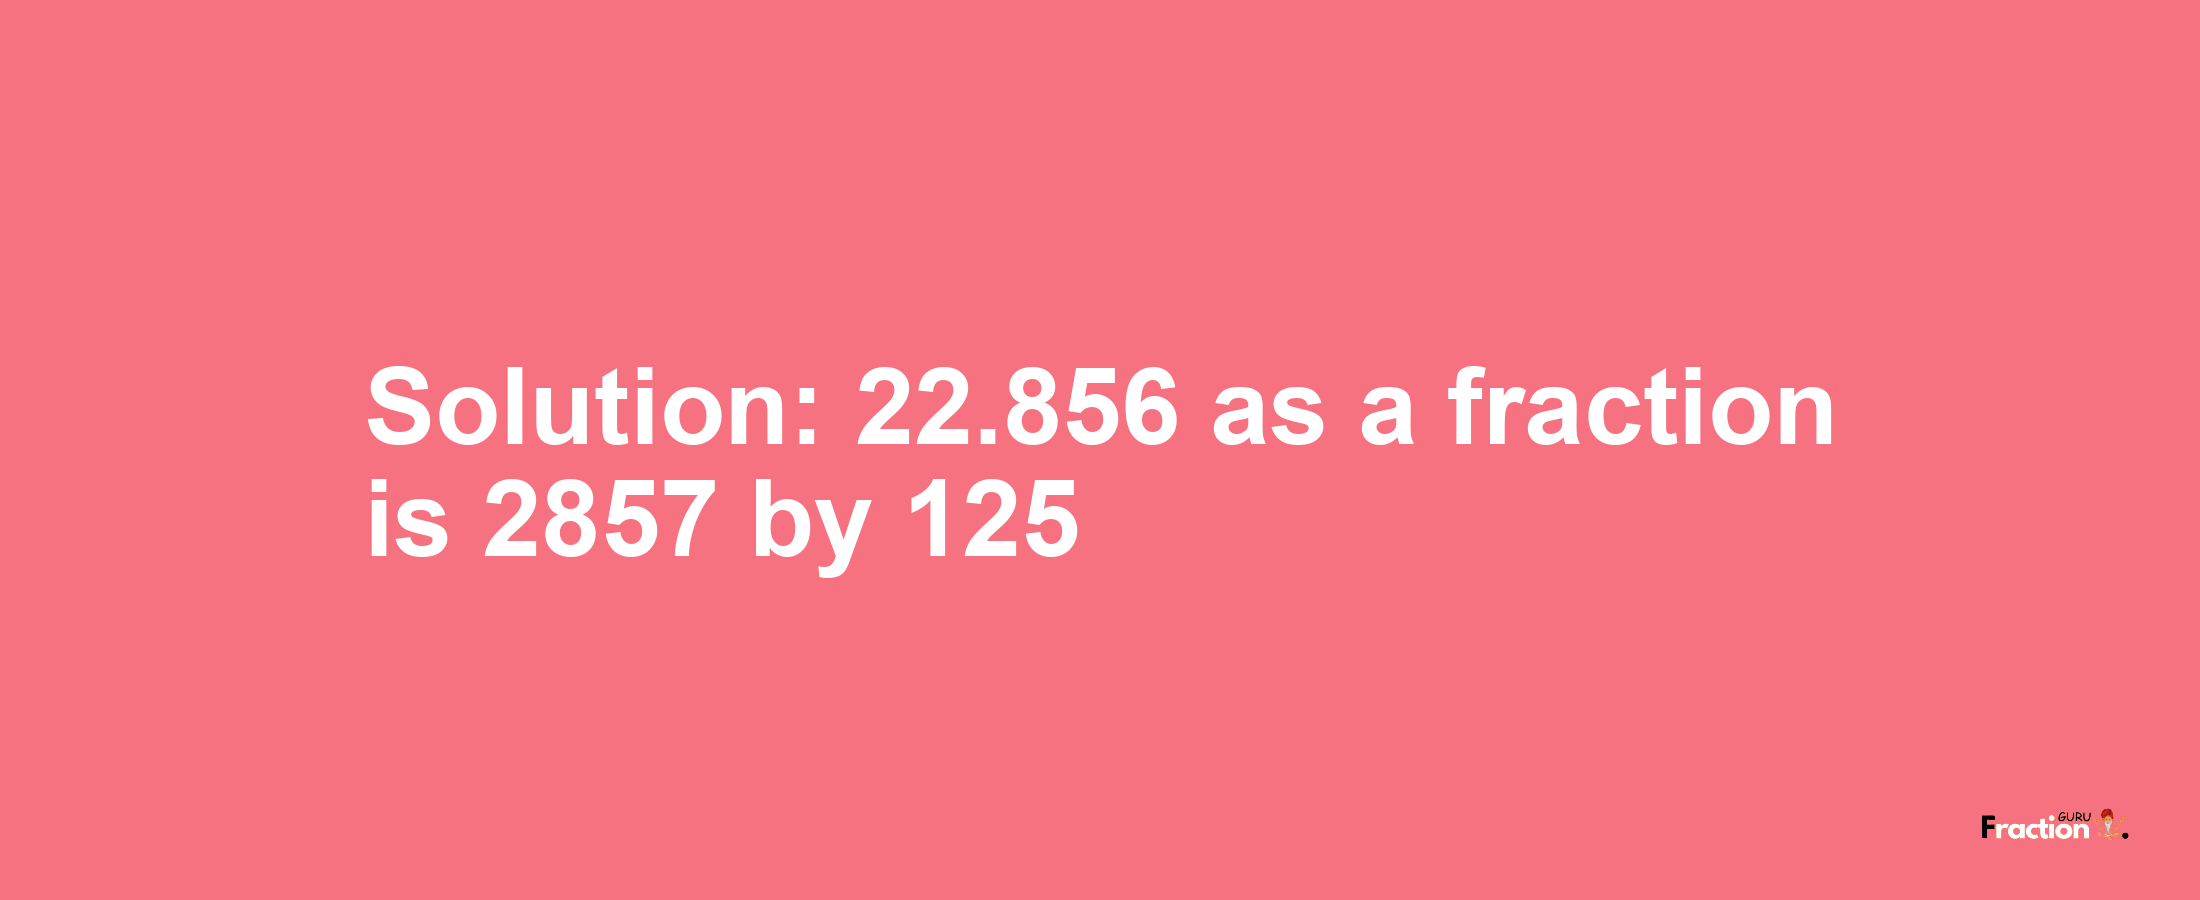 Solution:22.856 as a fraction is 2857/125